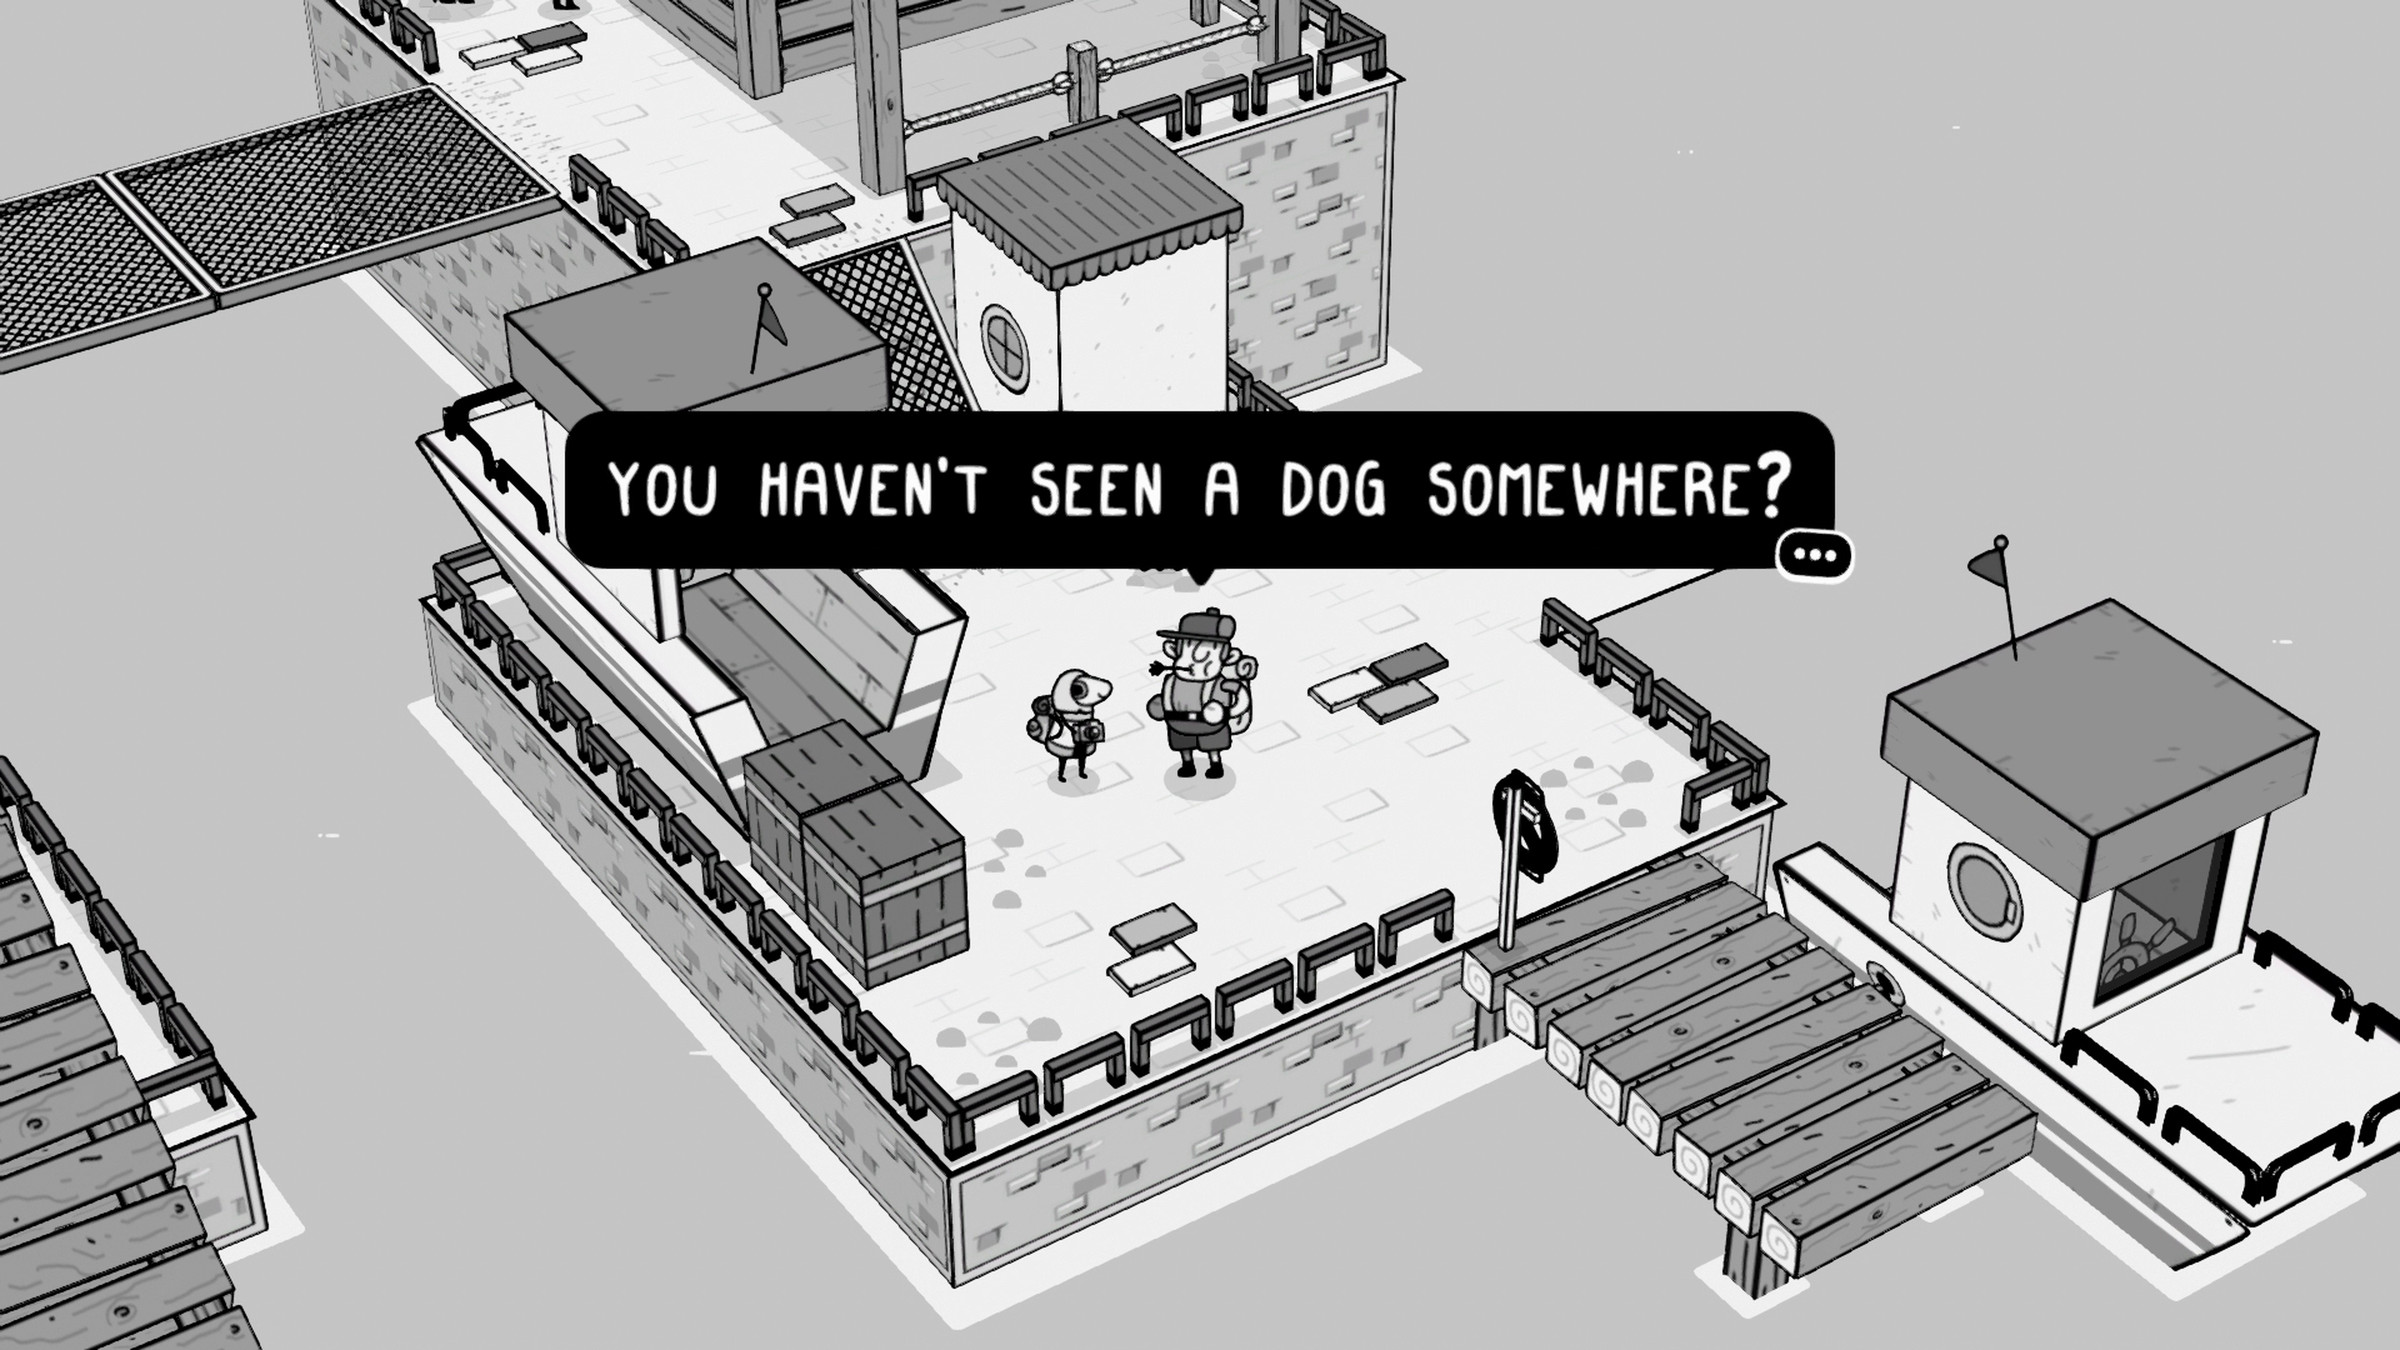 One quest involves finding this person’s dog.